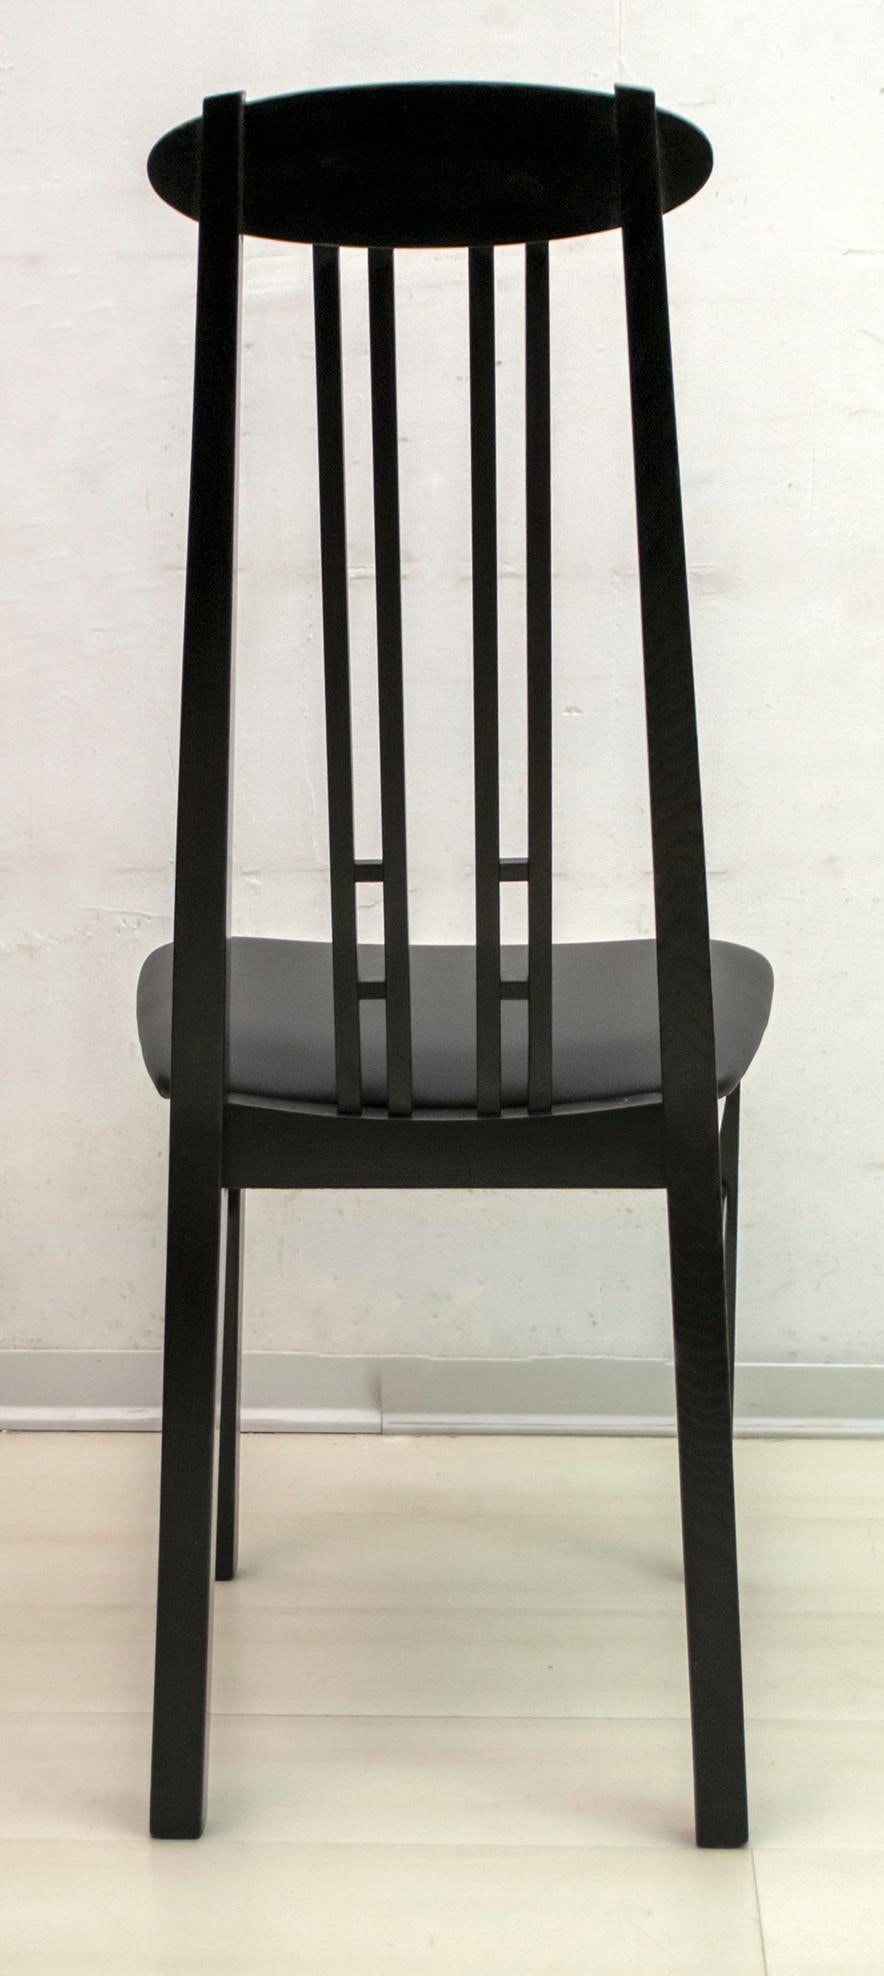 After Charles Rennie Mackintosh 6 Black Lacquered High-Backed Chairs, 1979 1